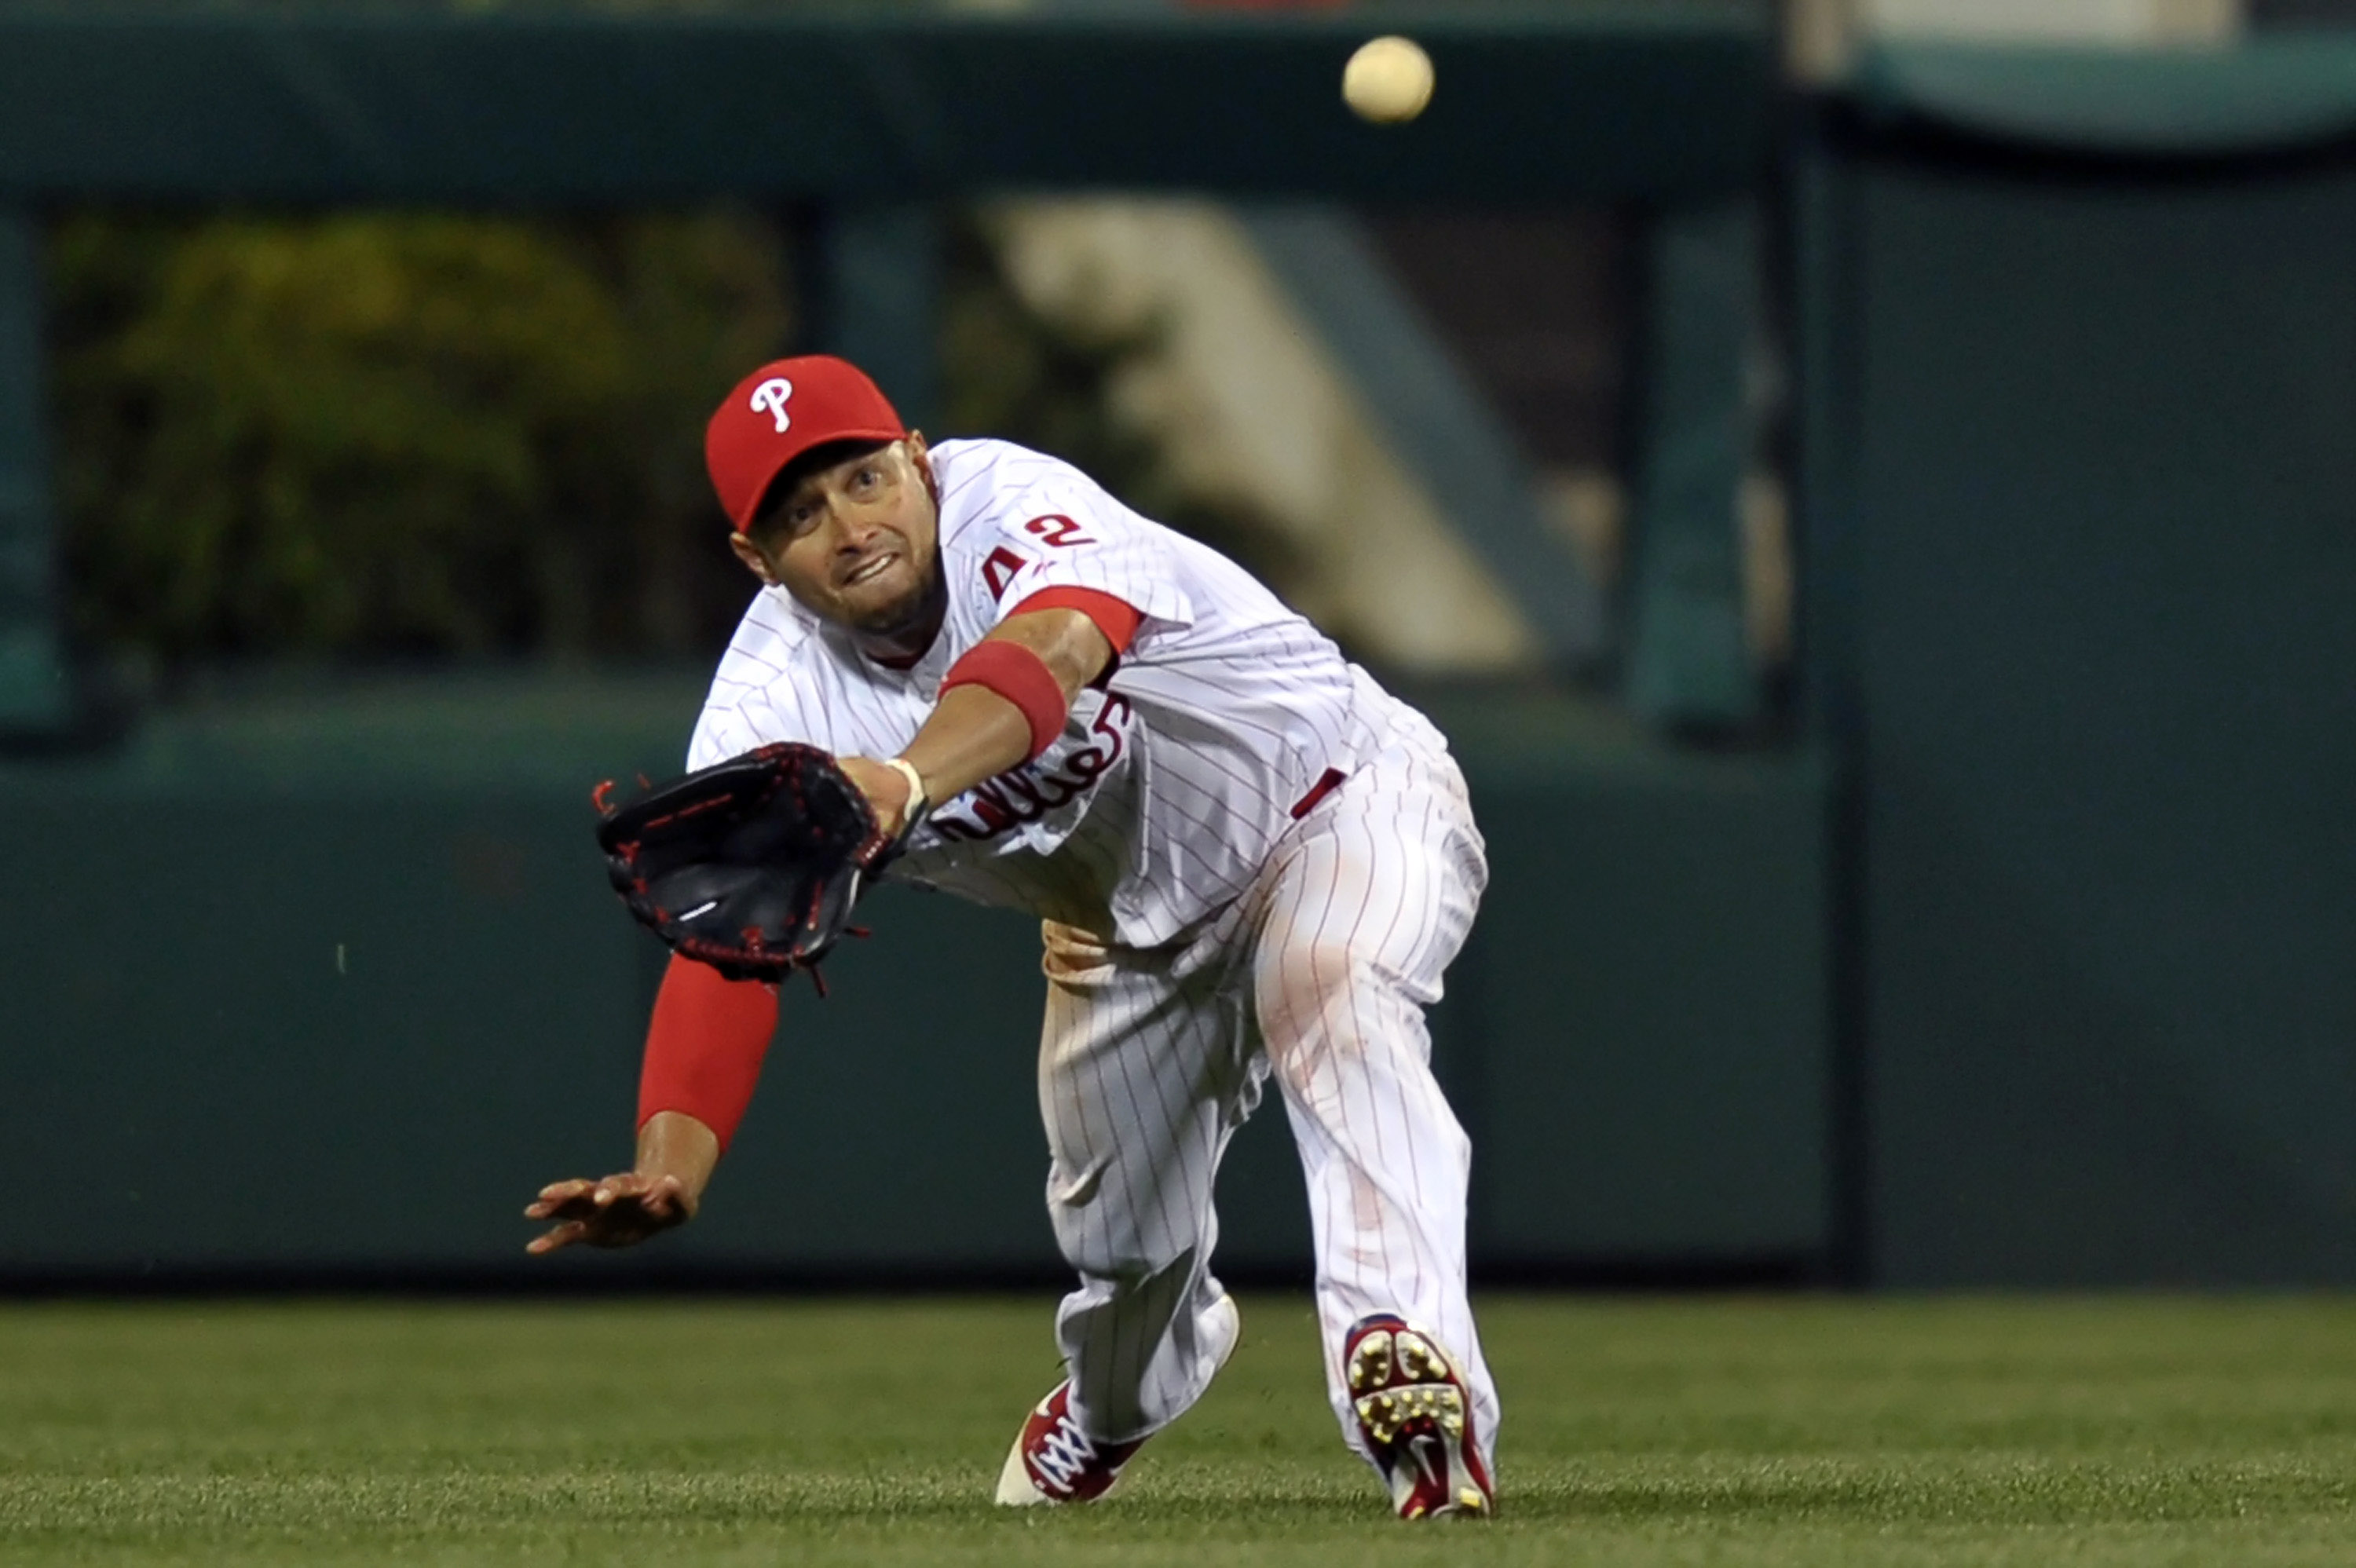 PHILADELPHIA, PA - APRIL 15: Shane Victorino #8 of the Philadelphia Phillies catches a fly ball during the game against the Florida Marlins at Citizens Bank Park on April 15, 2011 in Philadelphia, Pennsylvania. The Marlins won 4-3. (Photo by Drew Hallowel